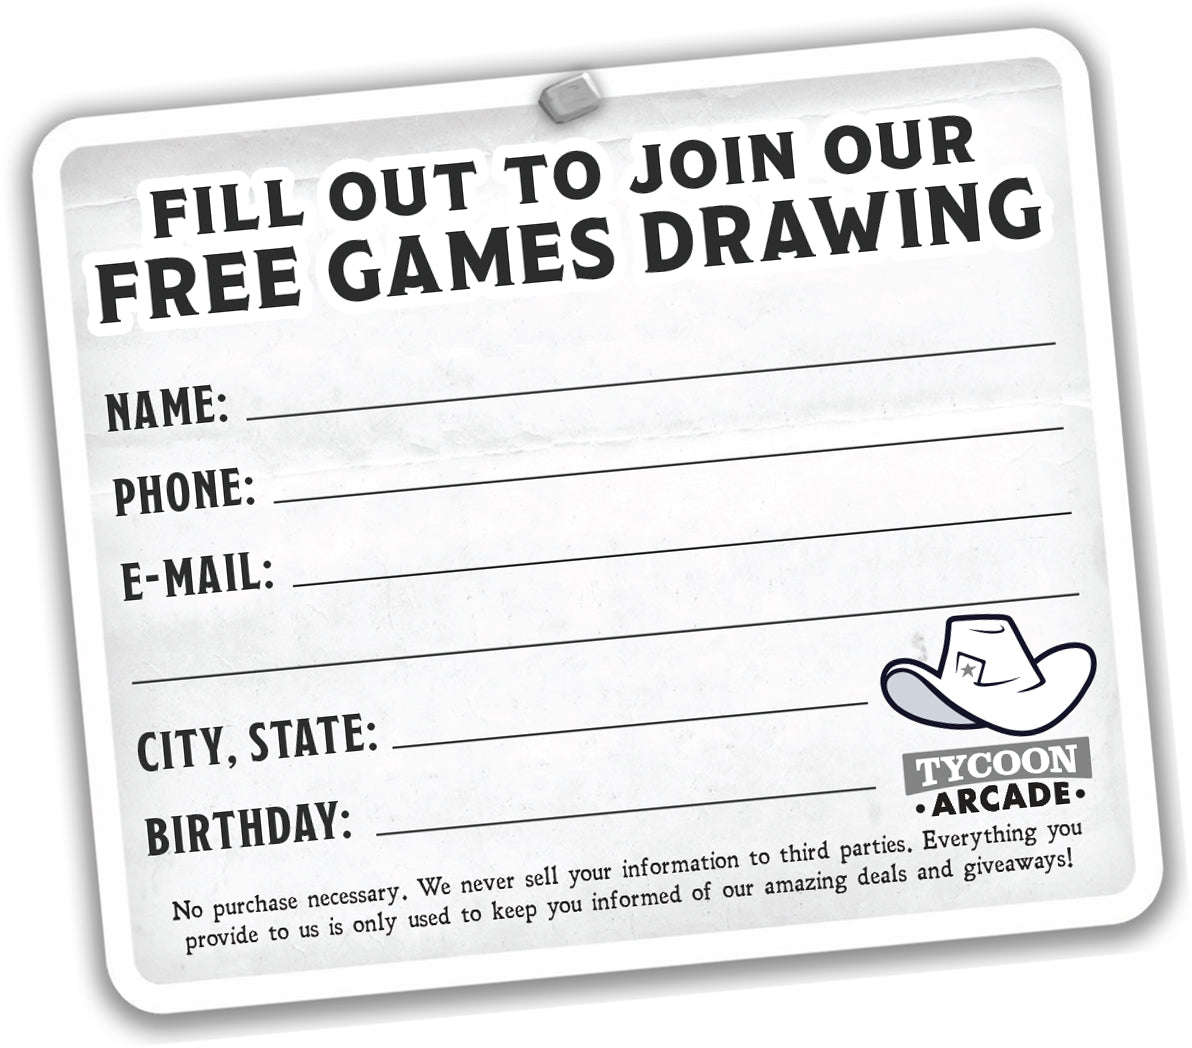 Image of signup form used in the arcade to sign people up for the free games drawing and the newsletter.